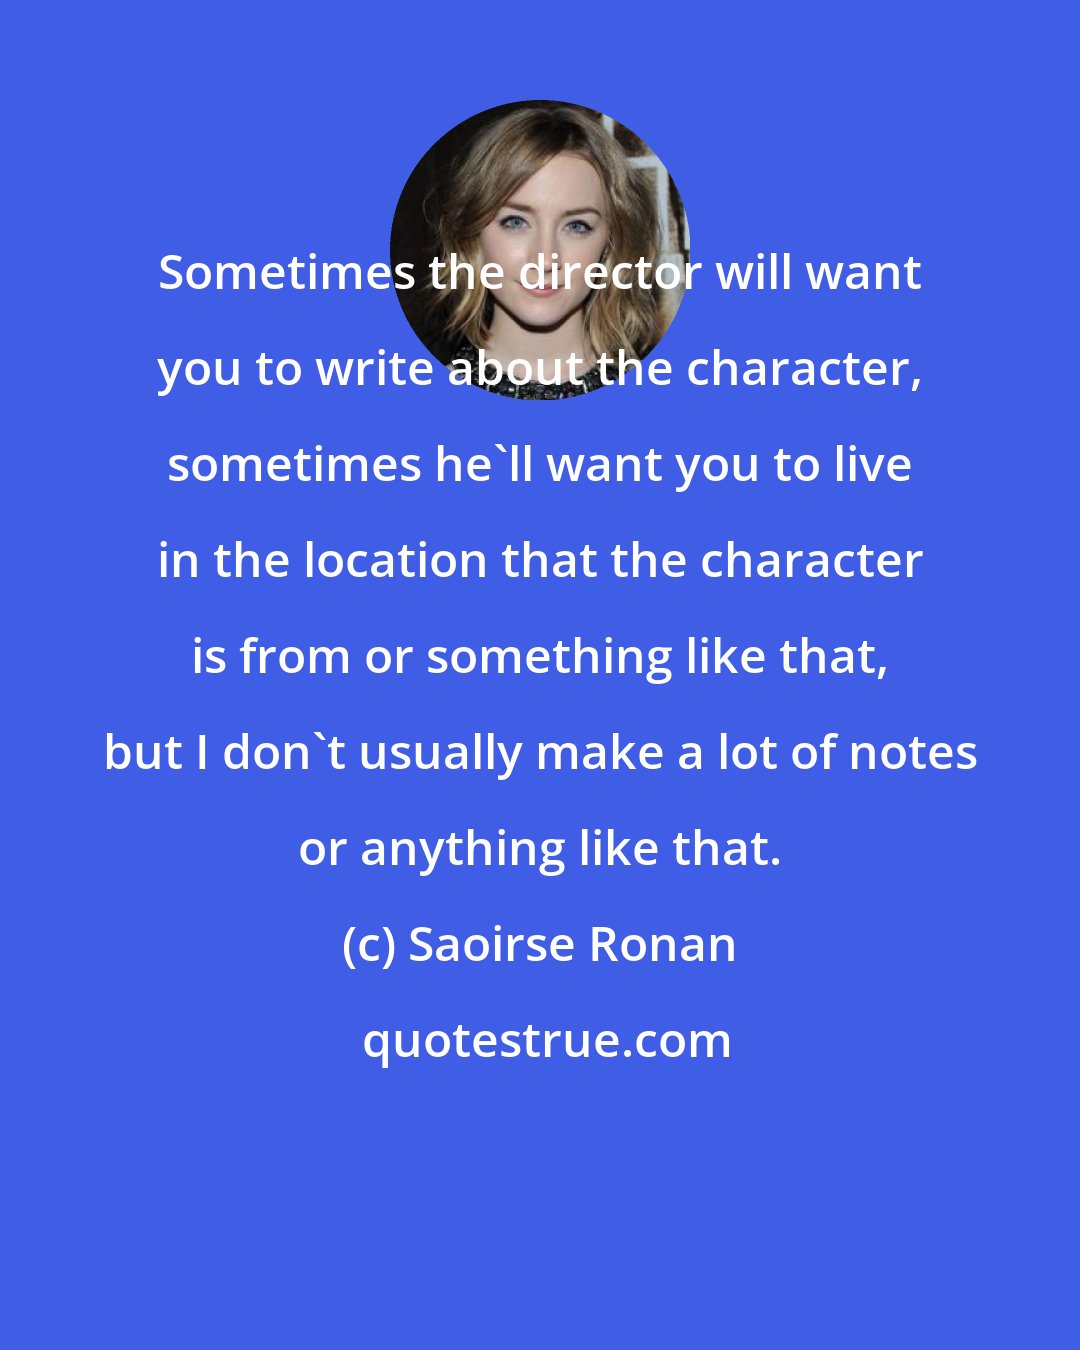 Saoirse Ronan: Sometimes the director will want you to write about the character, sometimes he'll want you to live in the location that the character is from or something like that, but I don't usually make a lot of notes or anything like that.